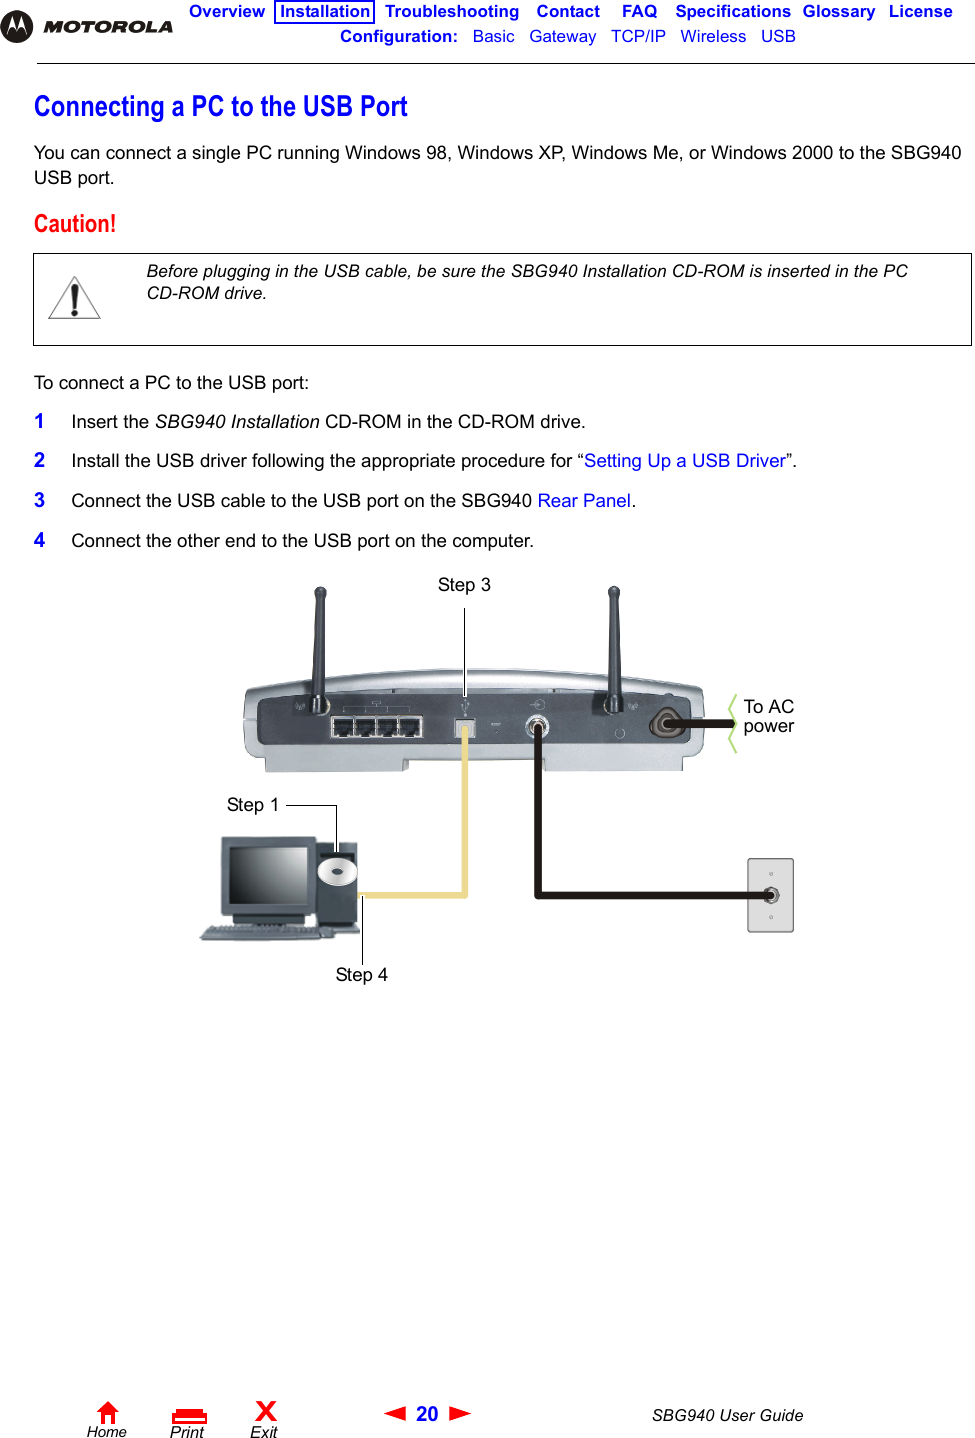 20 SBG940 User GuideHomeXExitPrintOverview Installation Troubleshooting Contact FAQ Specifications Glossary LicenseConfiguration:   Basic   Gateway   TCP/IP   Wireless   USB   Connecting a PC to the USB PortYou can connect a single PC running Windows 98, Windows XP, Windows Me, or Windows 2000 to the SBG940 USB port.To connect a PC to the USB port:1Insert the SBG940 Installation CD-ROM in the CD-ROM drive.2Install the USB driver following the appropriate procedure for “Setting Up a USB Driver”.3Connect the USB cable to the USB port on the SBG940 Rear Panel.4Connect the other end to the USB port on the computer. Caution!Before plugging in the USB cable, be sure the SBG940 Installation CD-ROM is inserted in the PC CD-ROM drive. Step 3Step 4To A C powerStep 1